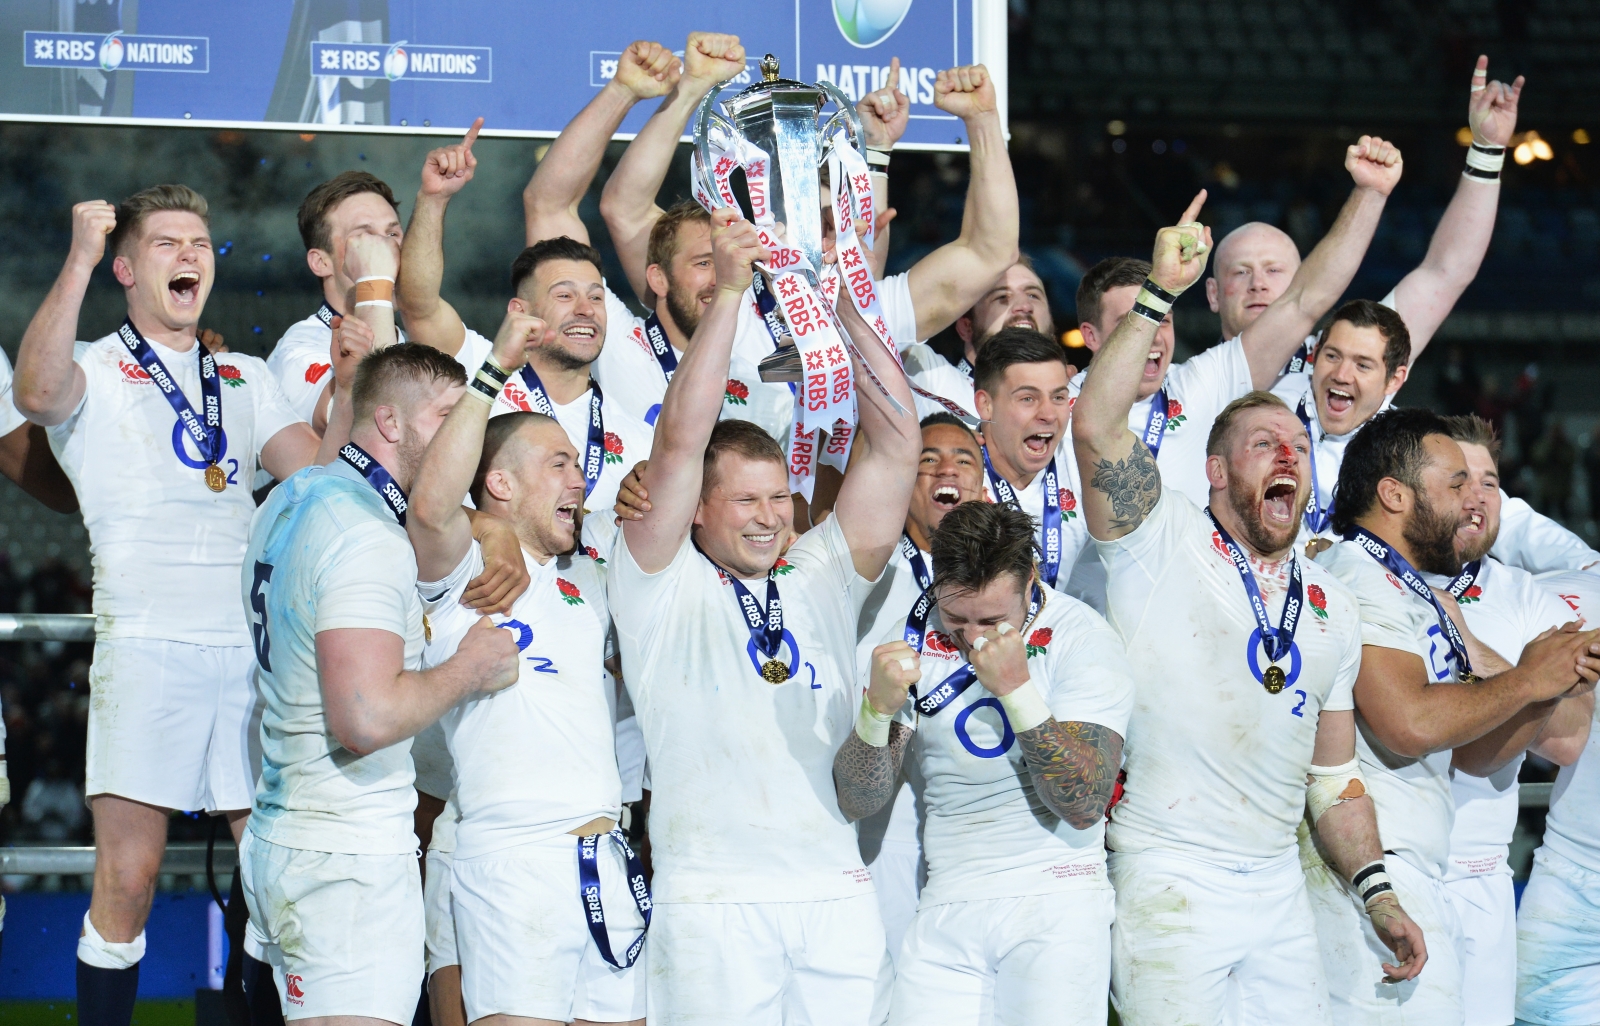 Rbs Six Nations 2017 Fixtures Results Table Tv Schedule And